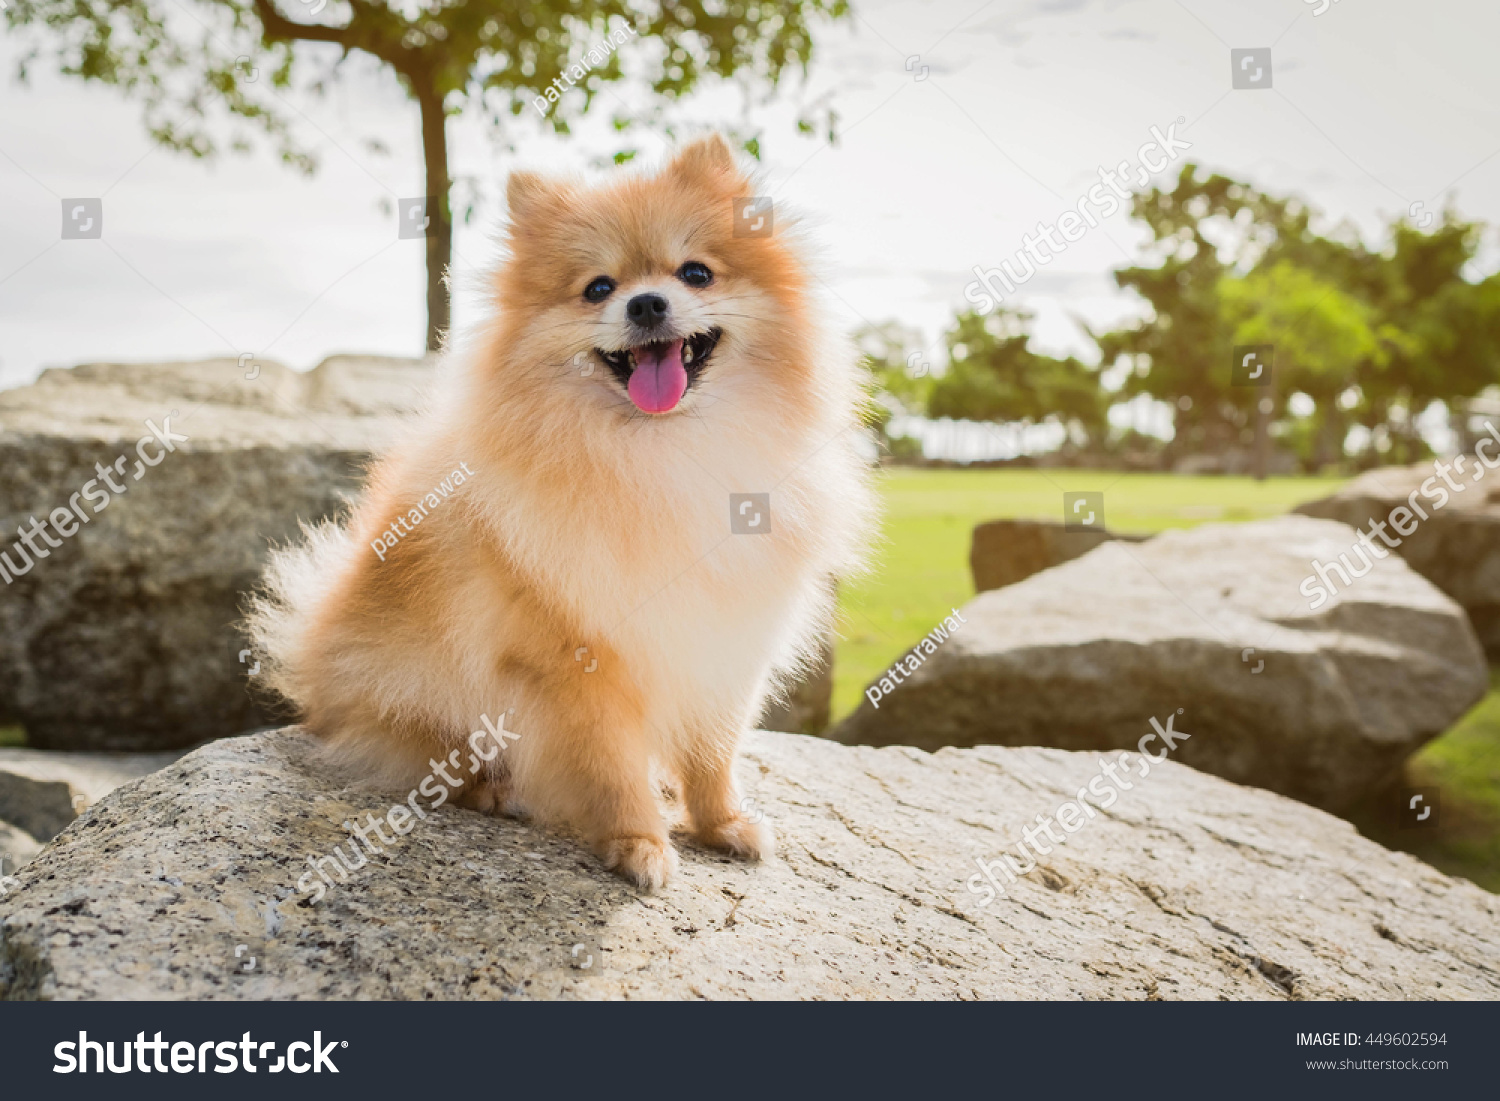 dog pomeranian spitz smiling watch the evening sun at the park's nature. #449602594